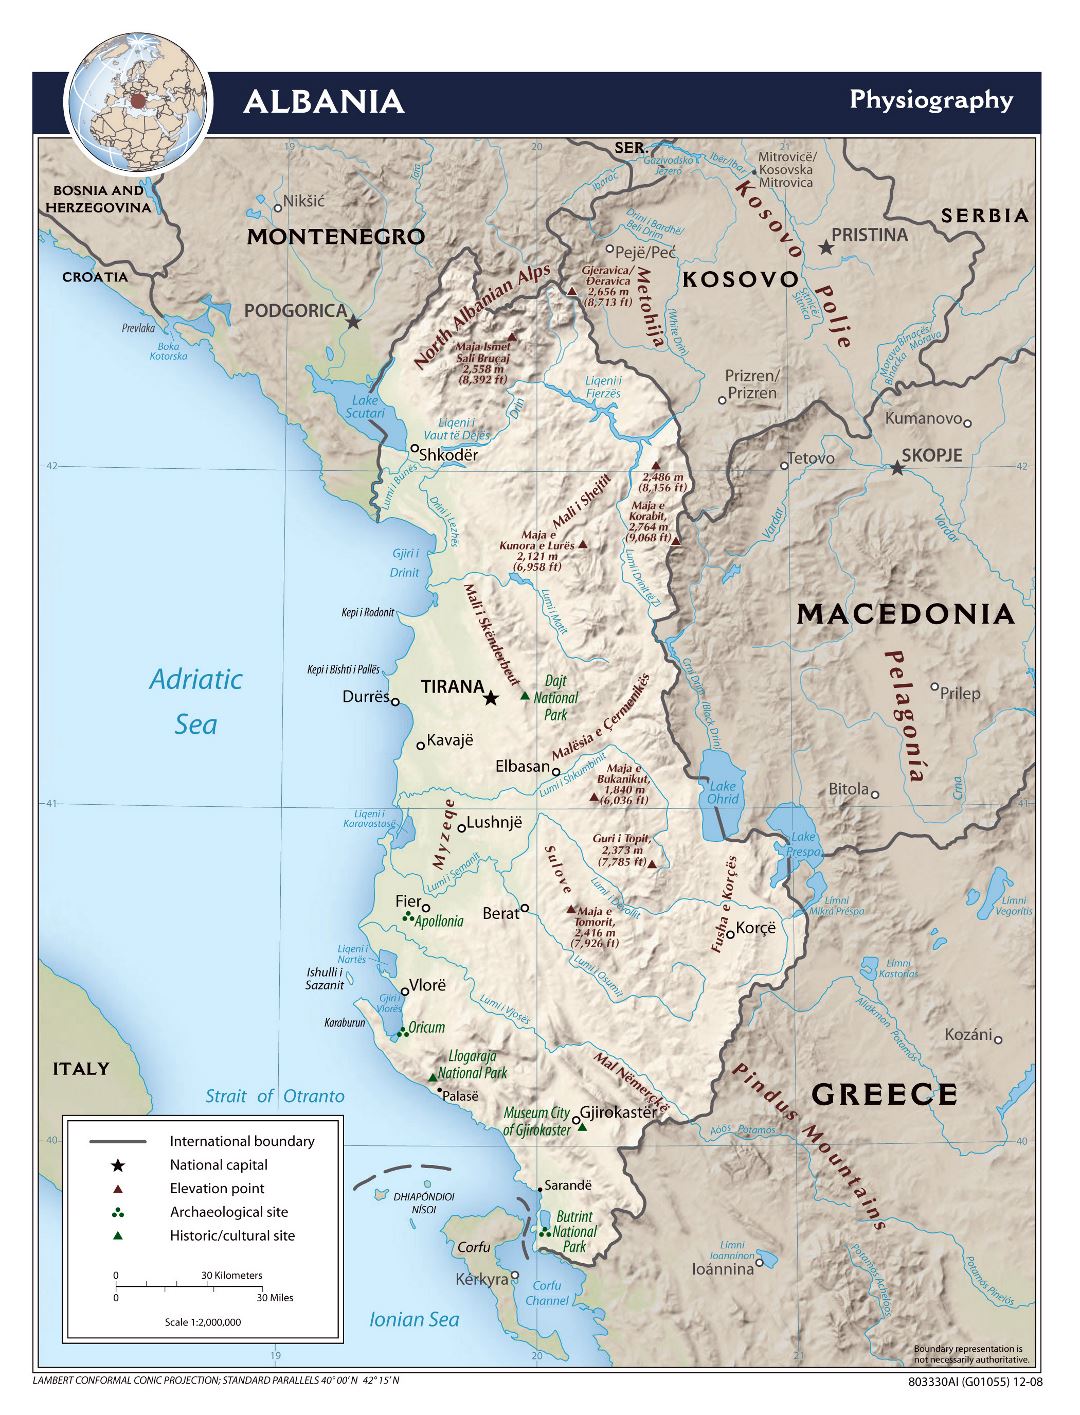 Large scale physiography map of Albania - 2008